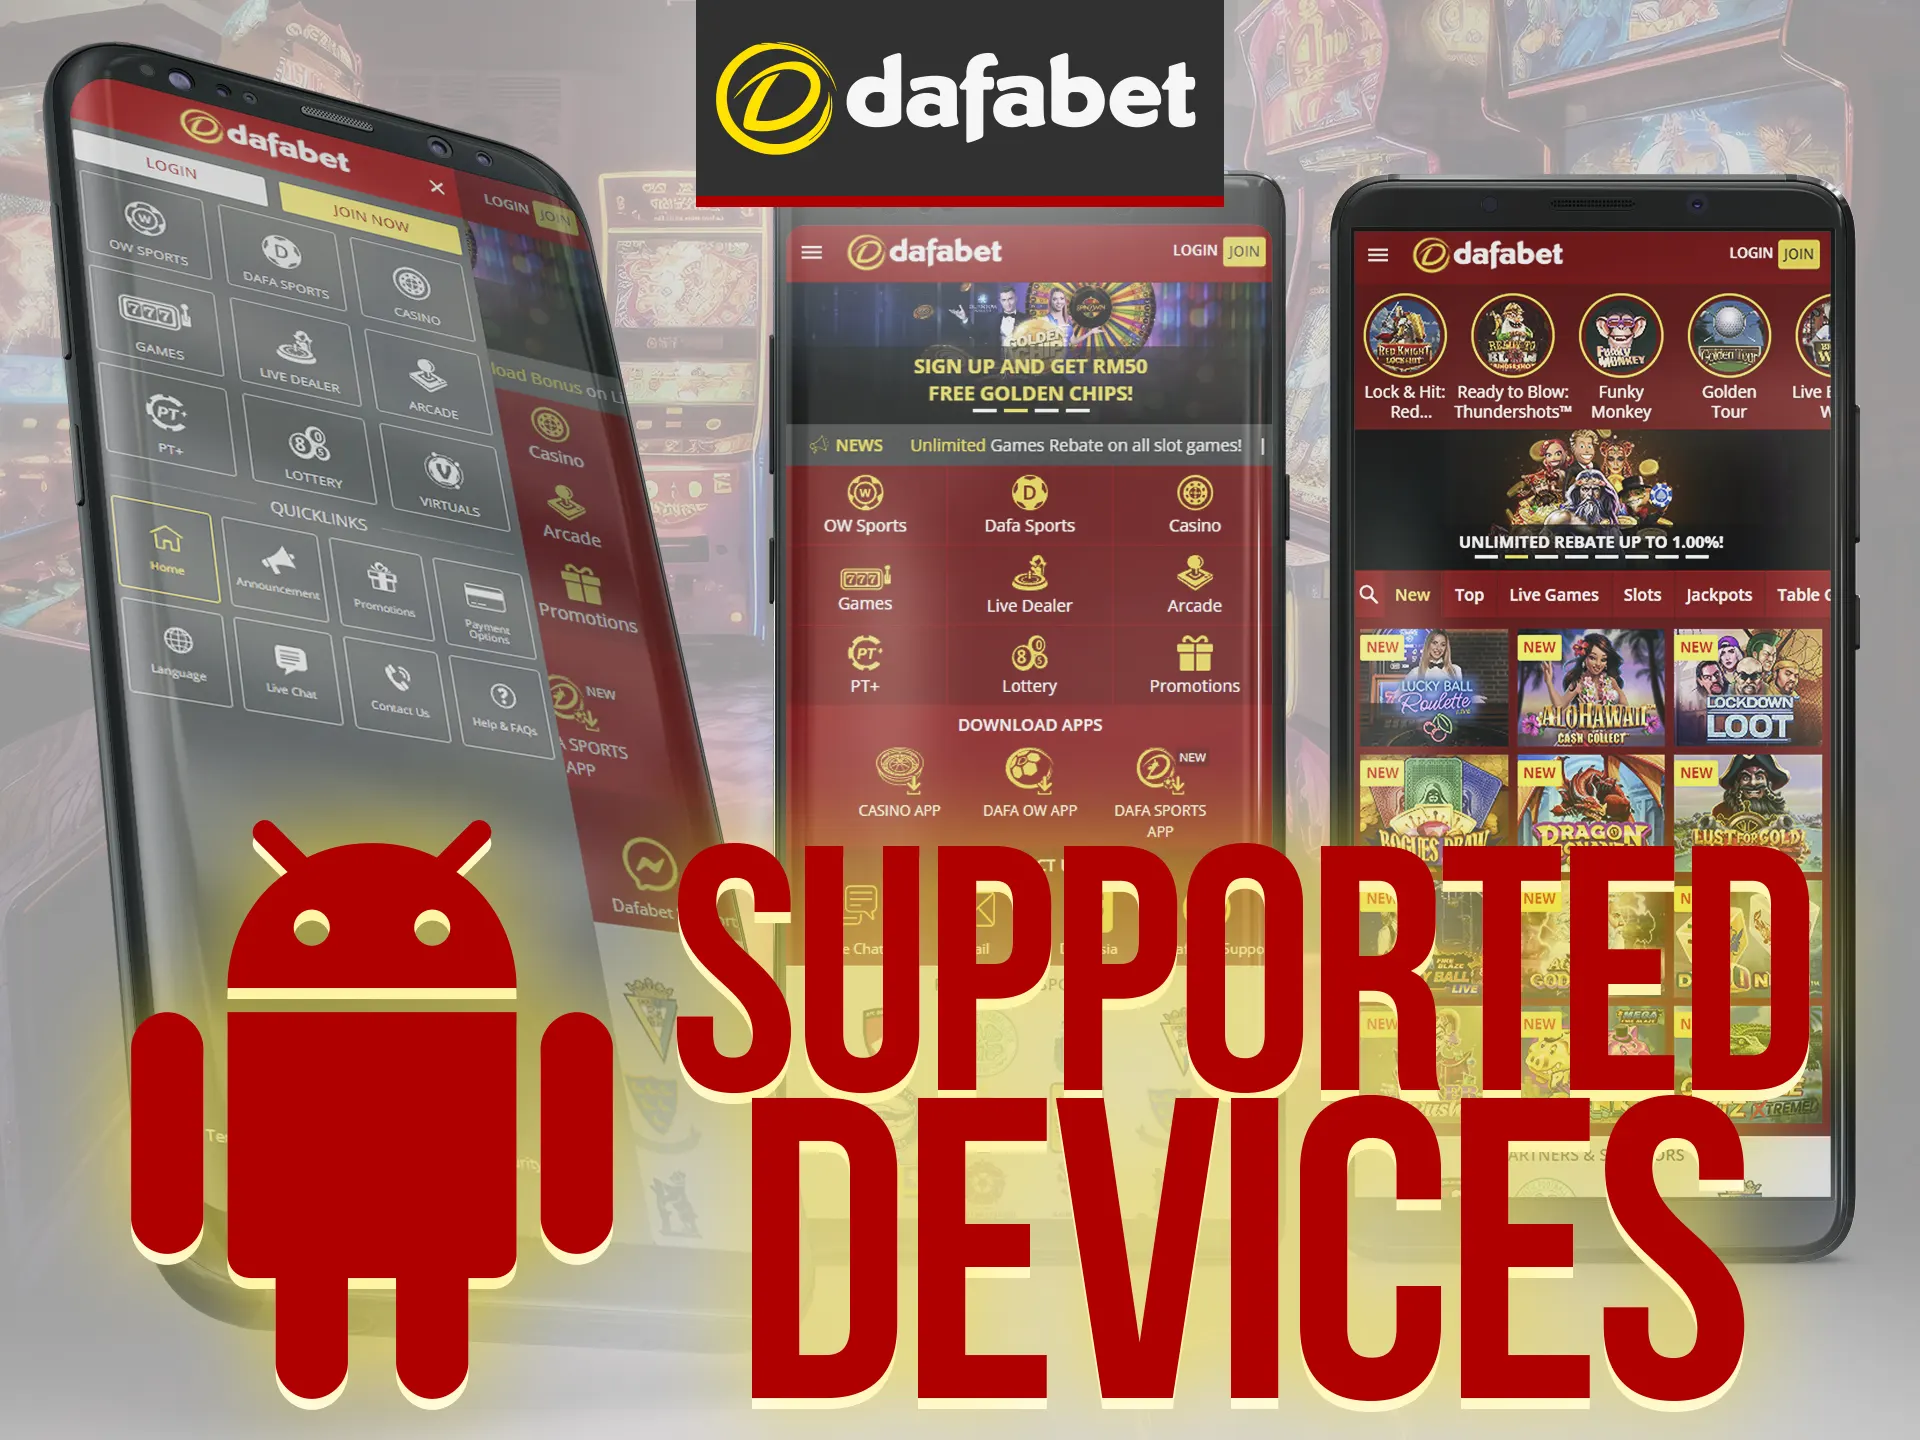 Dafabet Android app supports various devices, including Meizu, HTC, ASUS etc.